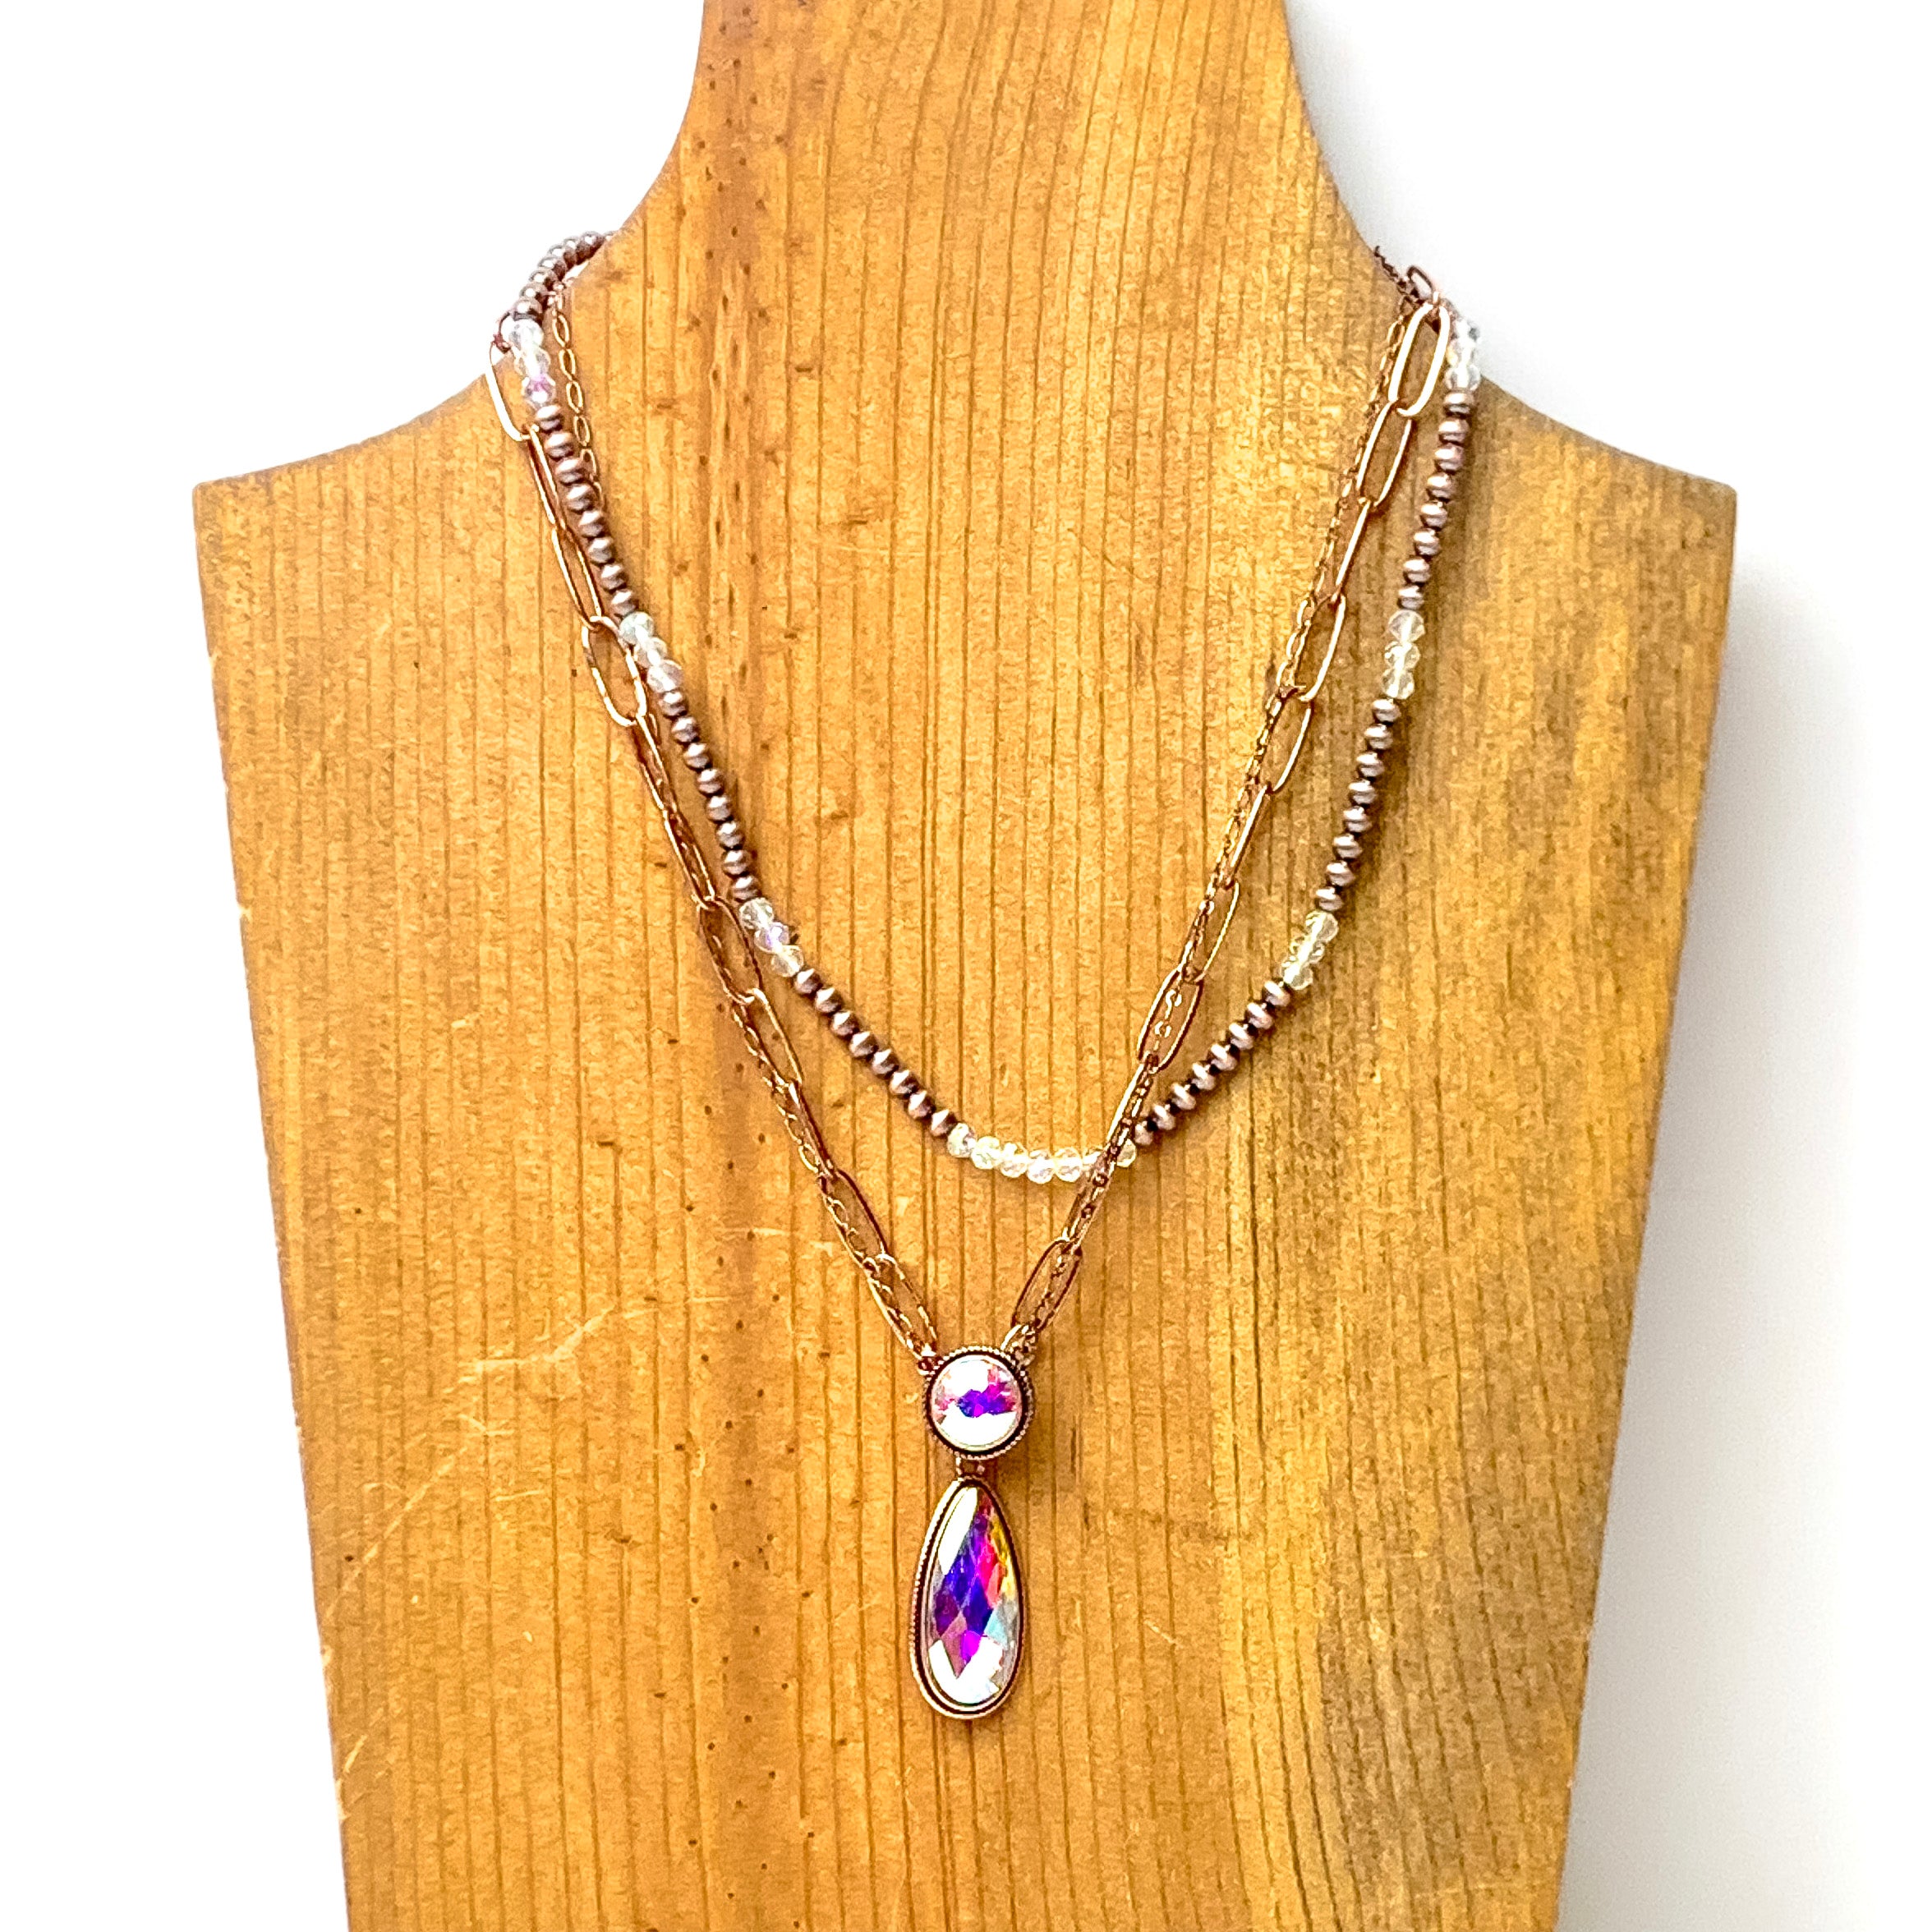 Three Row Faux Navajo Pearl Chain Necklace with AB Stone Pendants in Copper Tone - Giddy Up Glamour Boutique